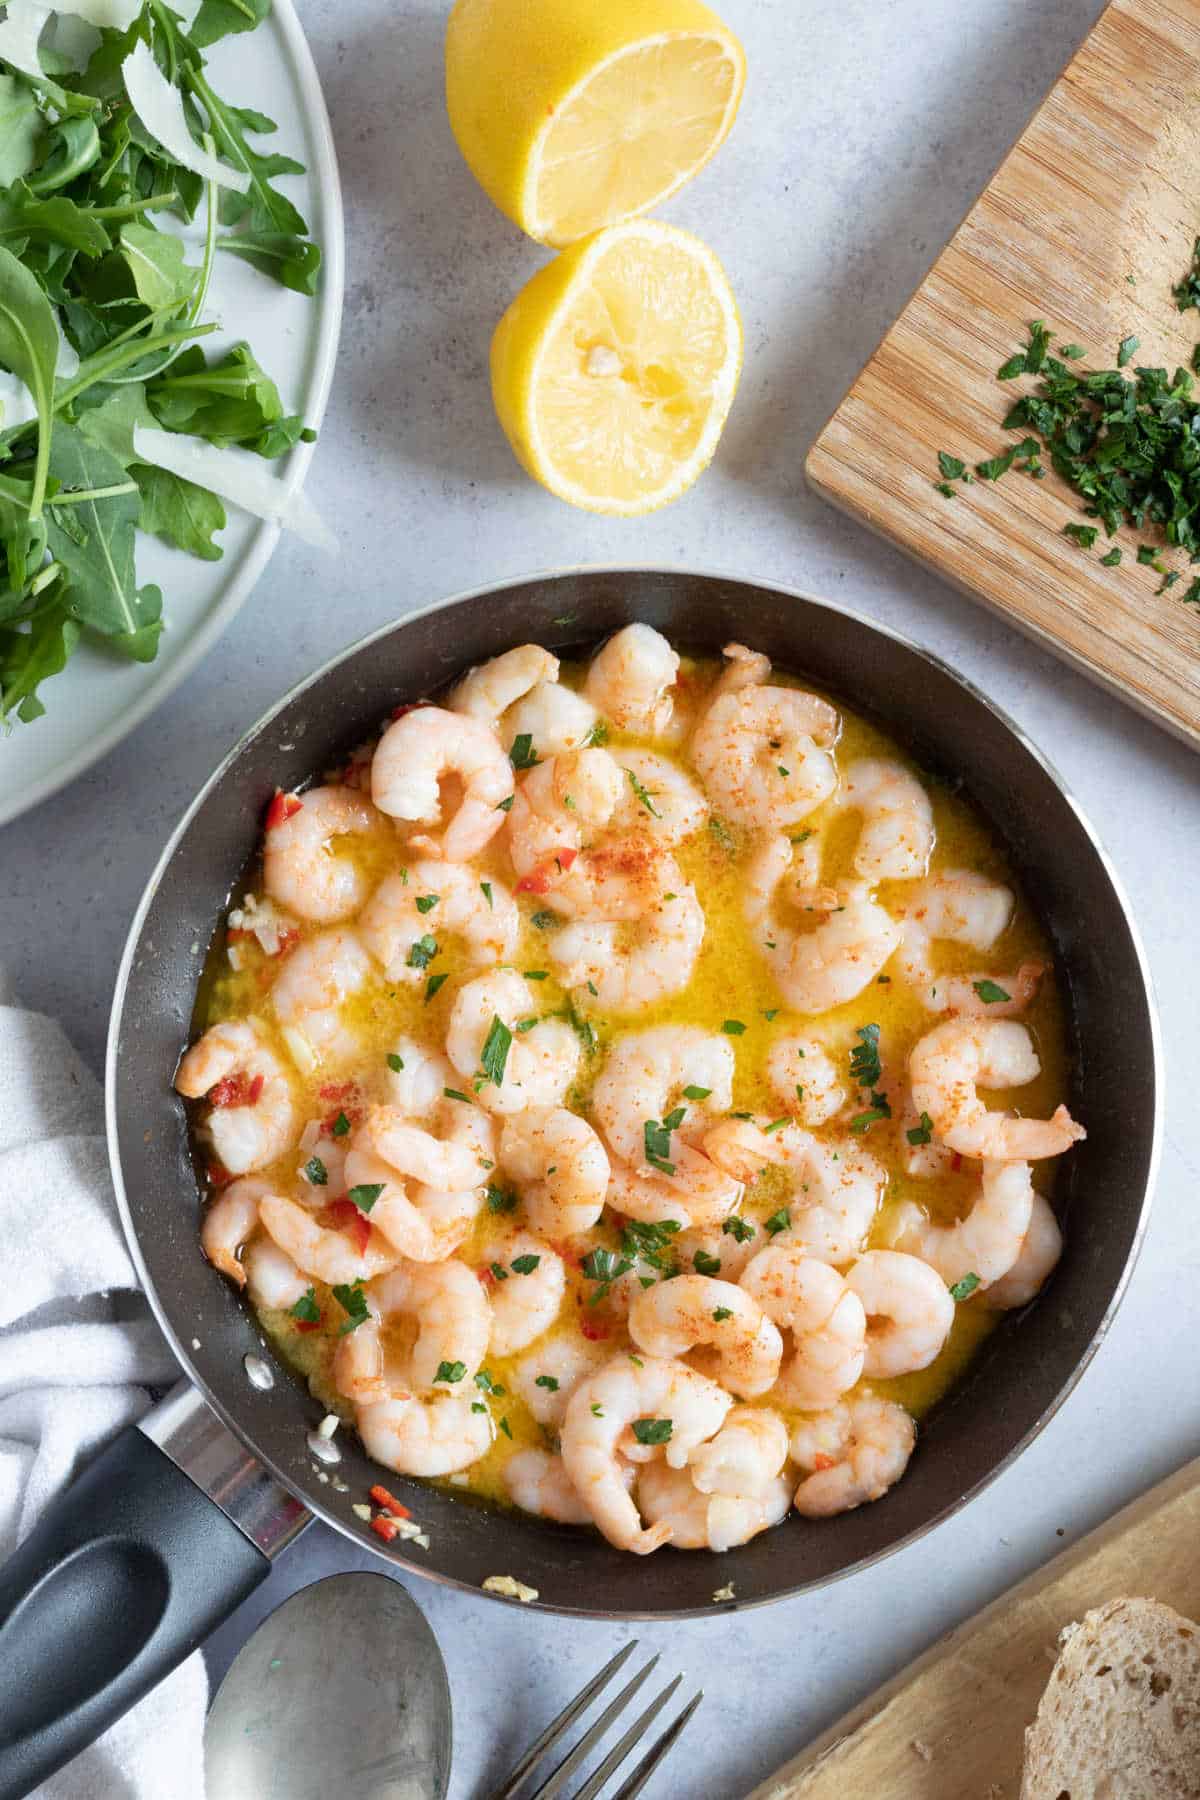 Pil Pil Prawns with bread and salad.